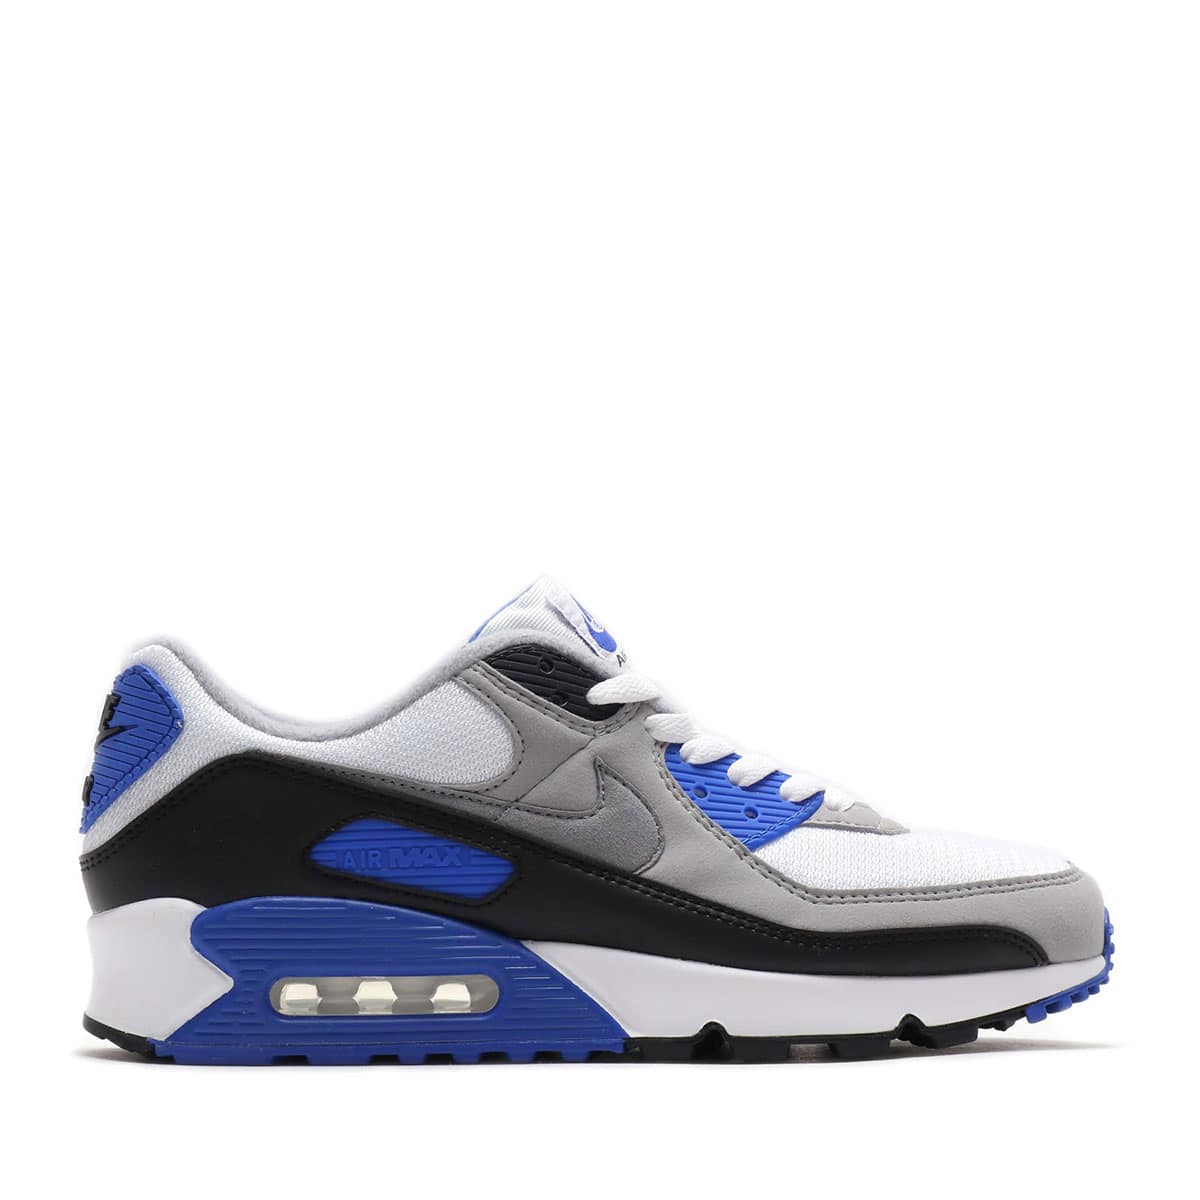 NIKE AIR MAX 90 WHITE/PARTICLE GREY-HYPER ROYAL-BLACK 20SP-S